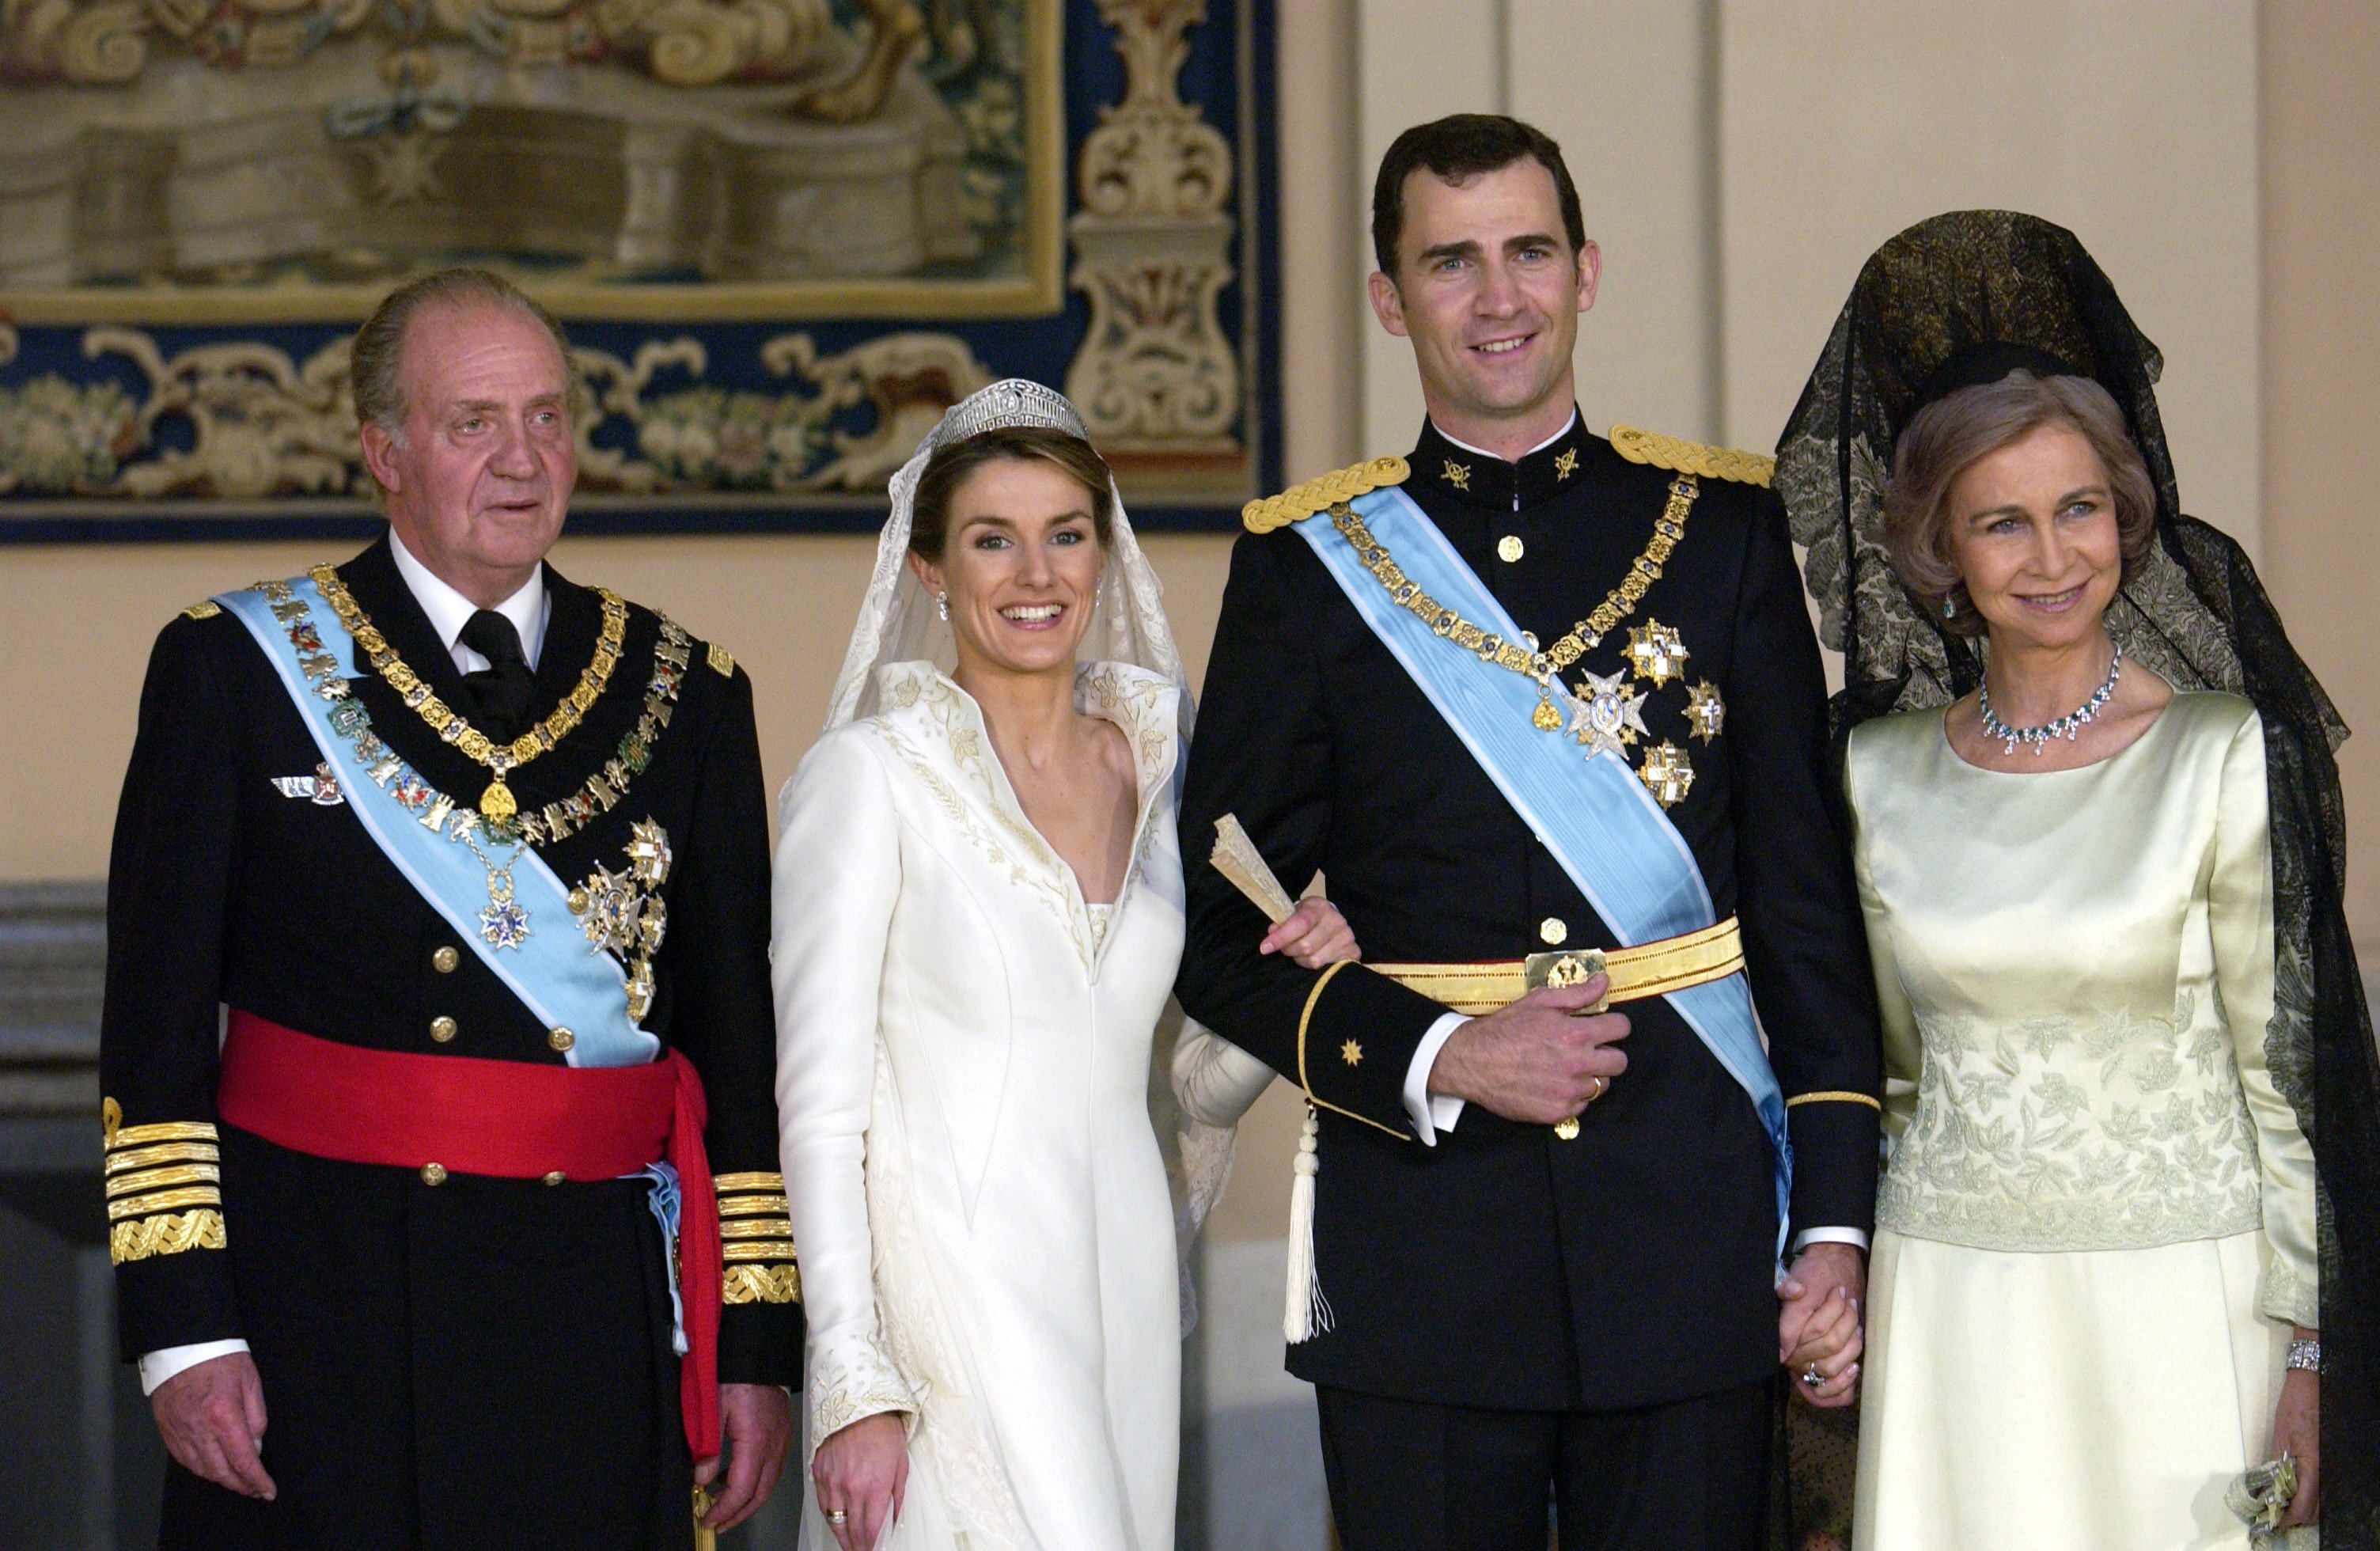 Crown Prince Felipe of Spain pictured with his bride Crown Princess Letizia and his parents King Juan Carlos of Spain and Queen Sofia in the Royal Palace. / Source: Getty Images